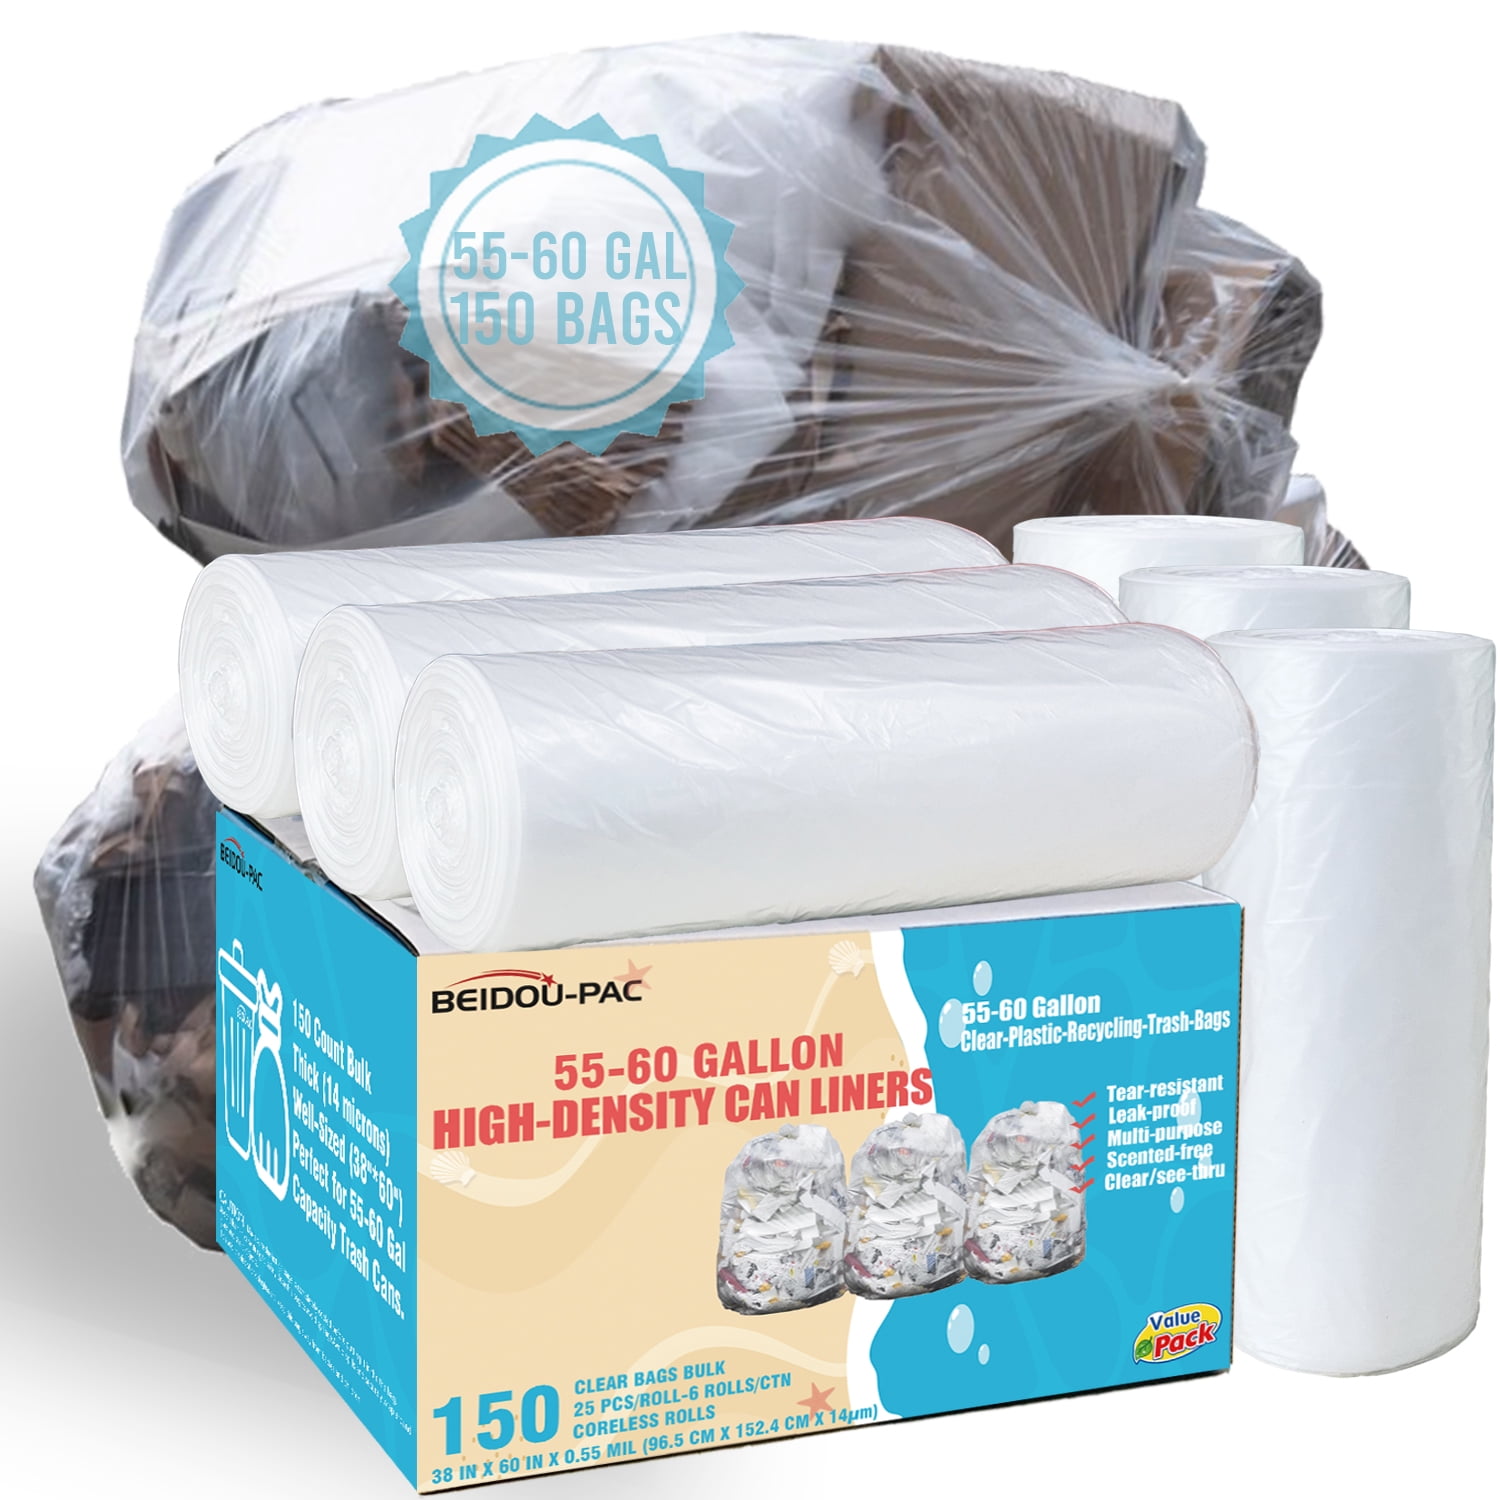 Member's Mark Commercial Contractor Clean-Up Trash Bags (42 gal